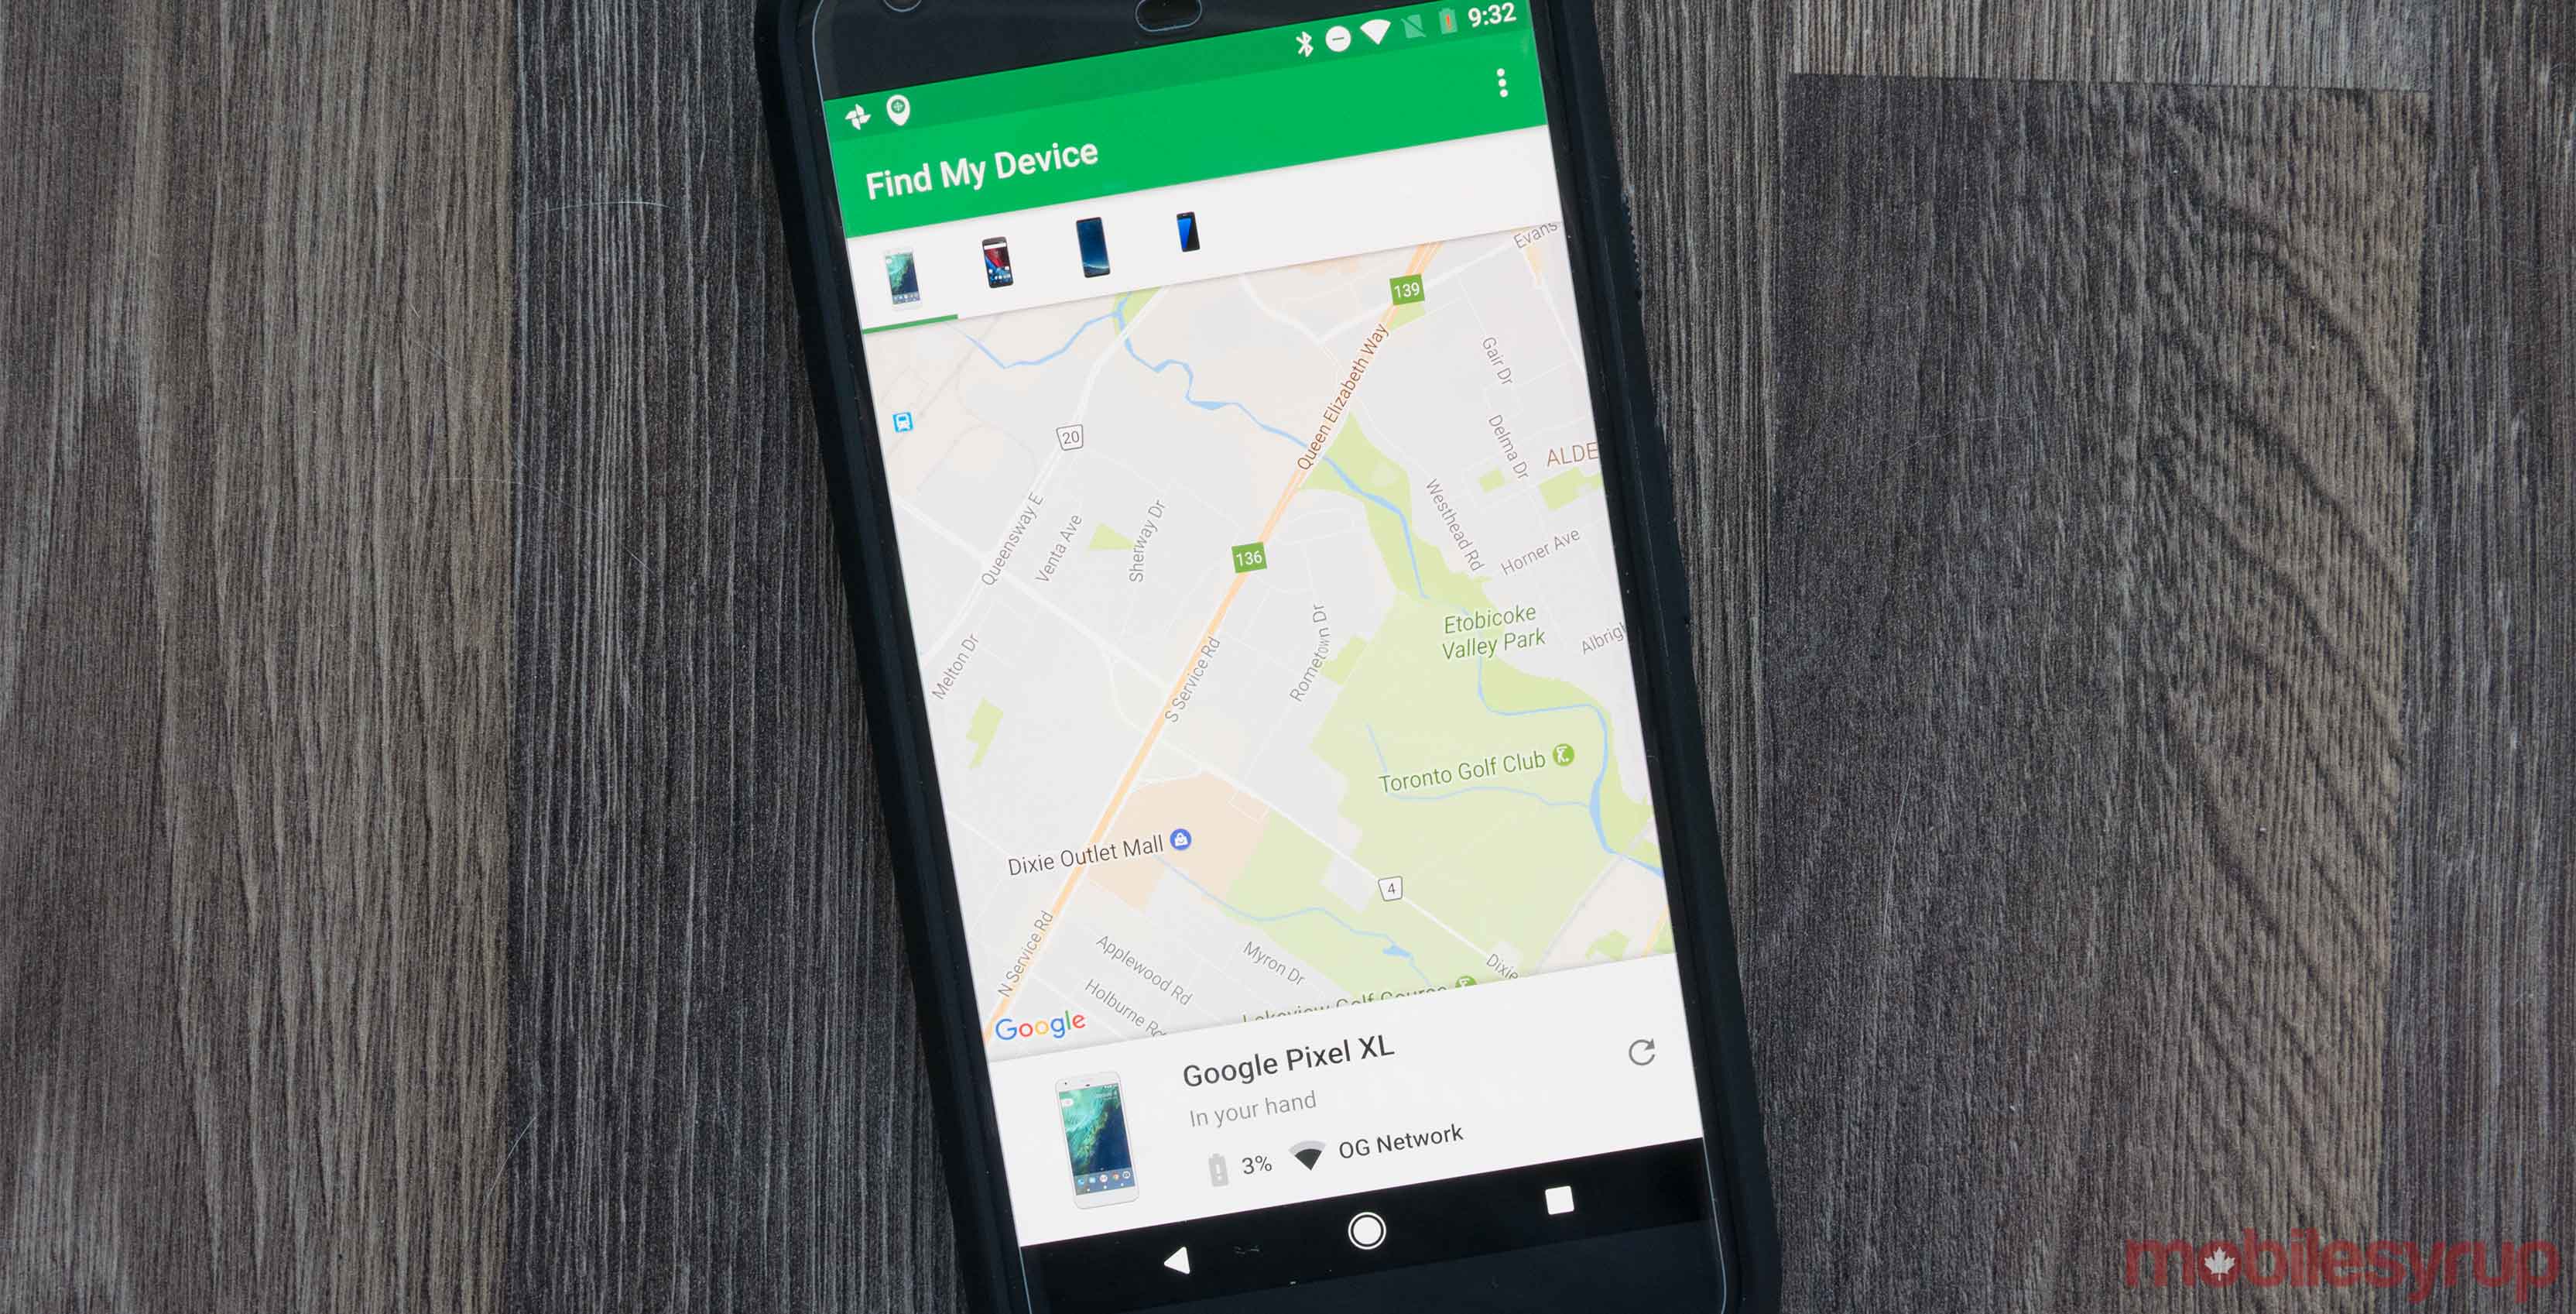 Say hello to Find My Device, Google's reworked device tracking app